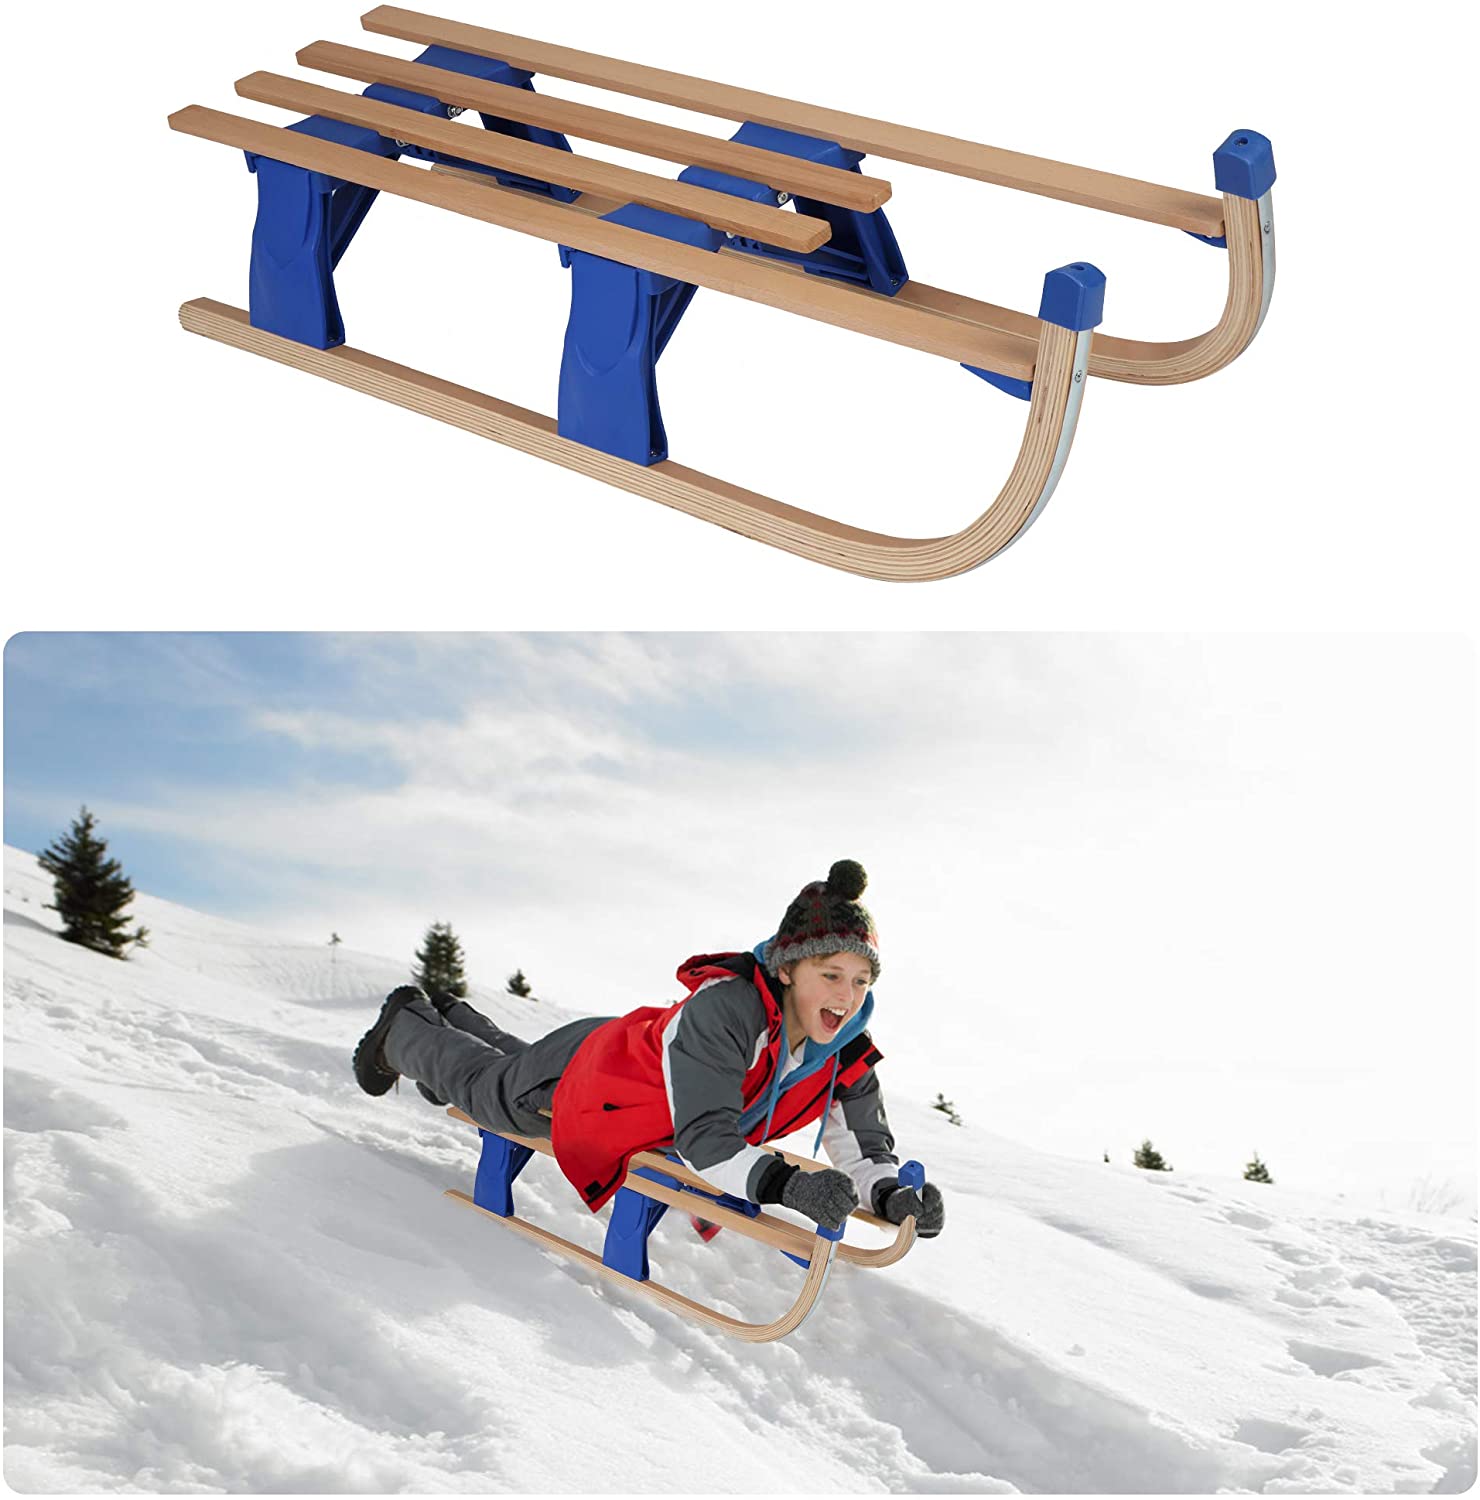 Sled Wooden Foldable For Kids And Adult Outdoor Play With A Pulling Rope 42 inch Weight Capacity, 220lbs